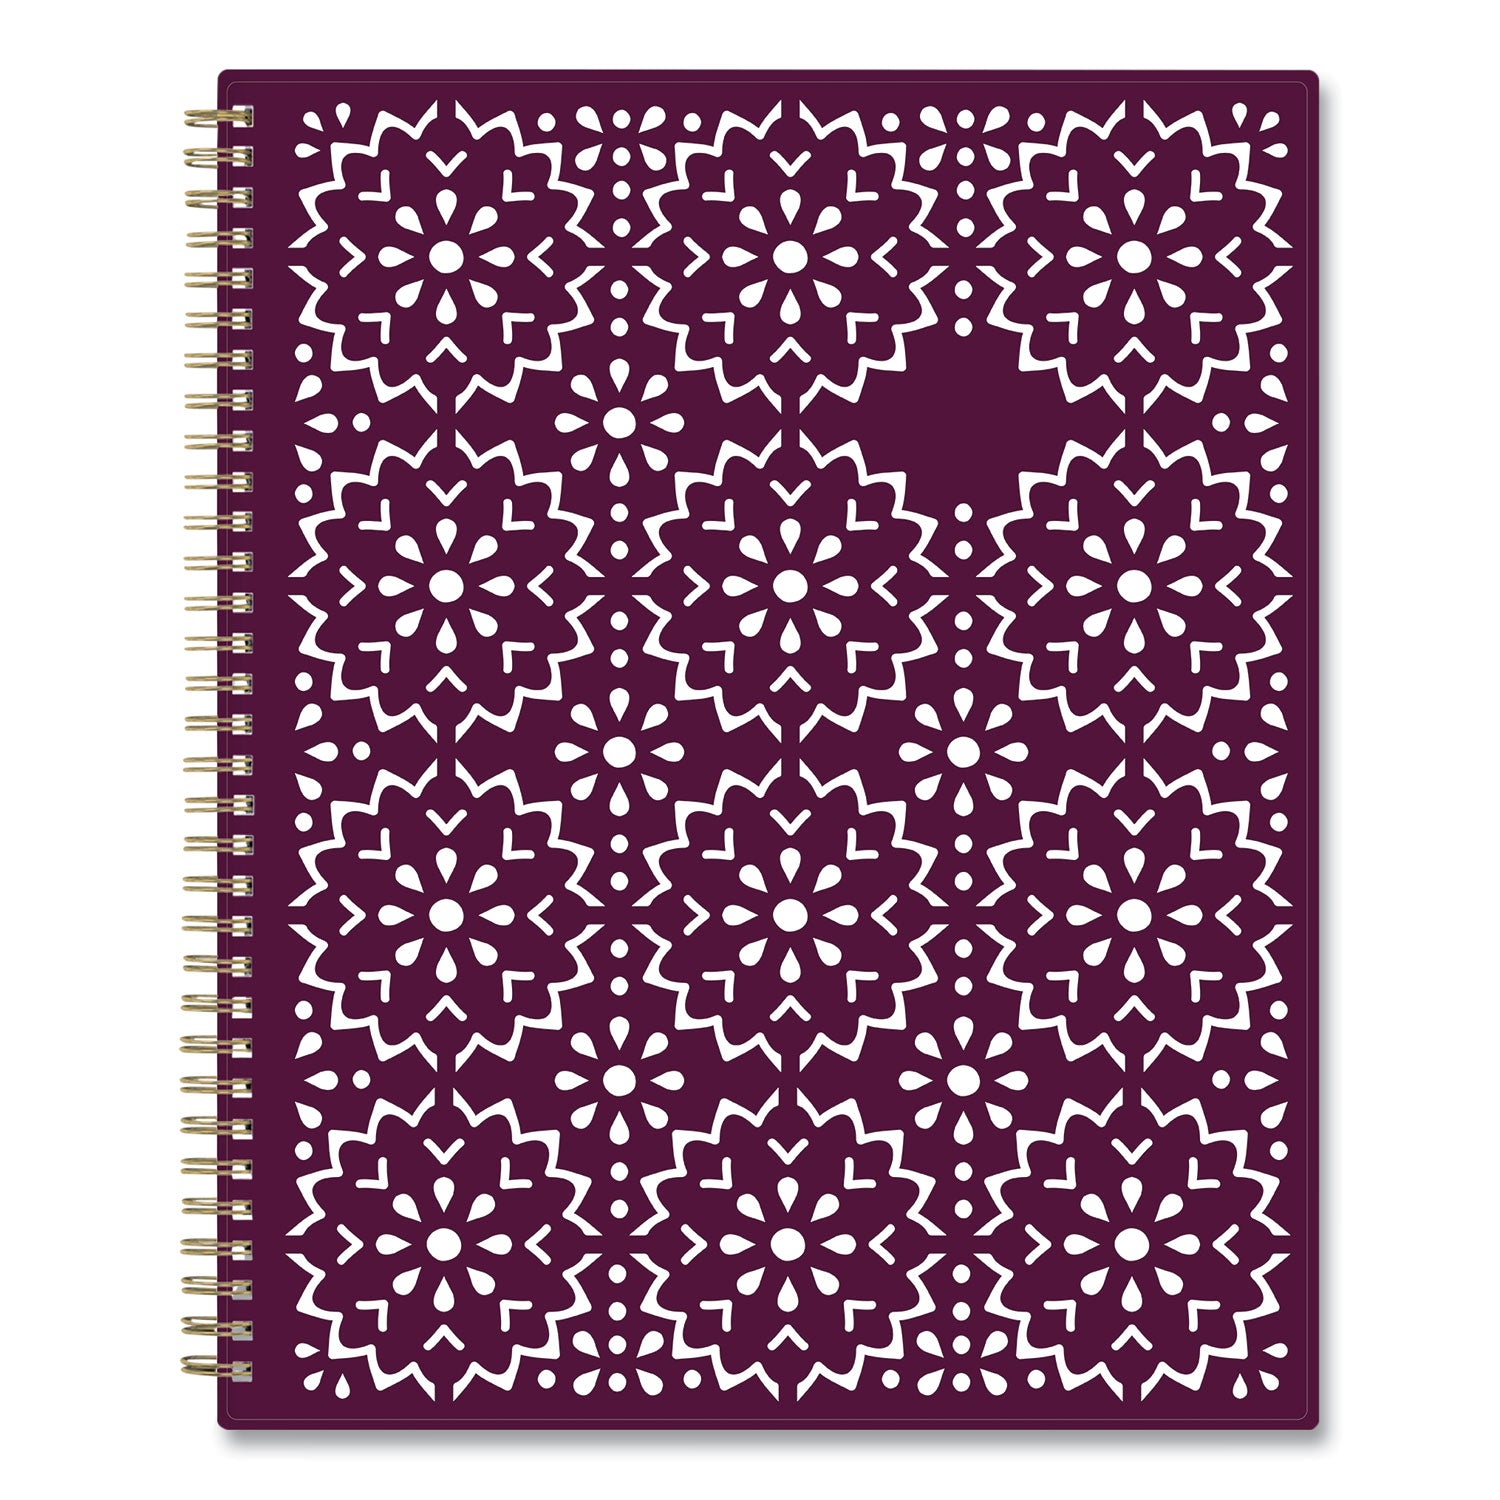 gili-weekly-monthly-planner-gili-jewel-tone-artwork-11-x-85-plum-cover-12-month-jan-to-dec-2024_bls117889 - 4